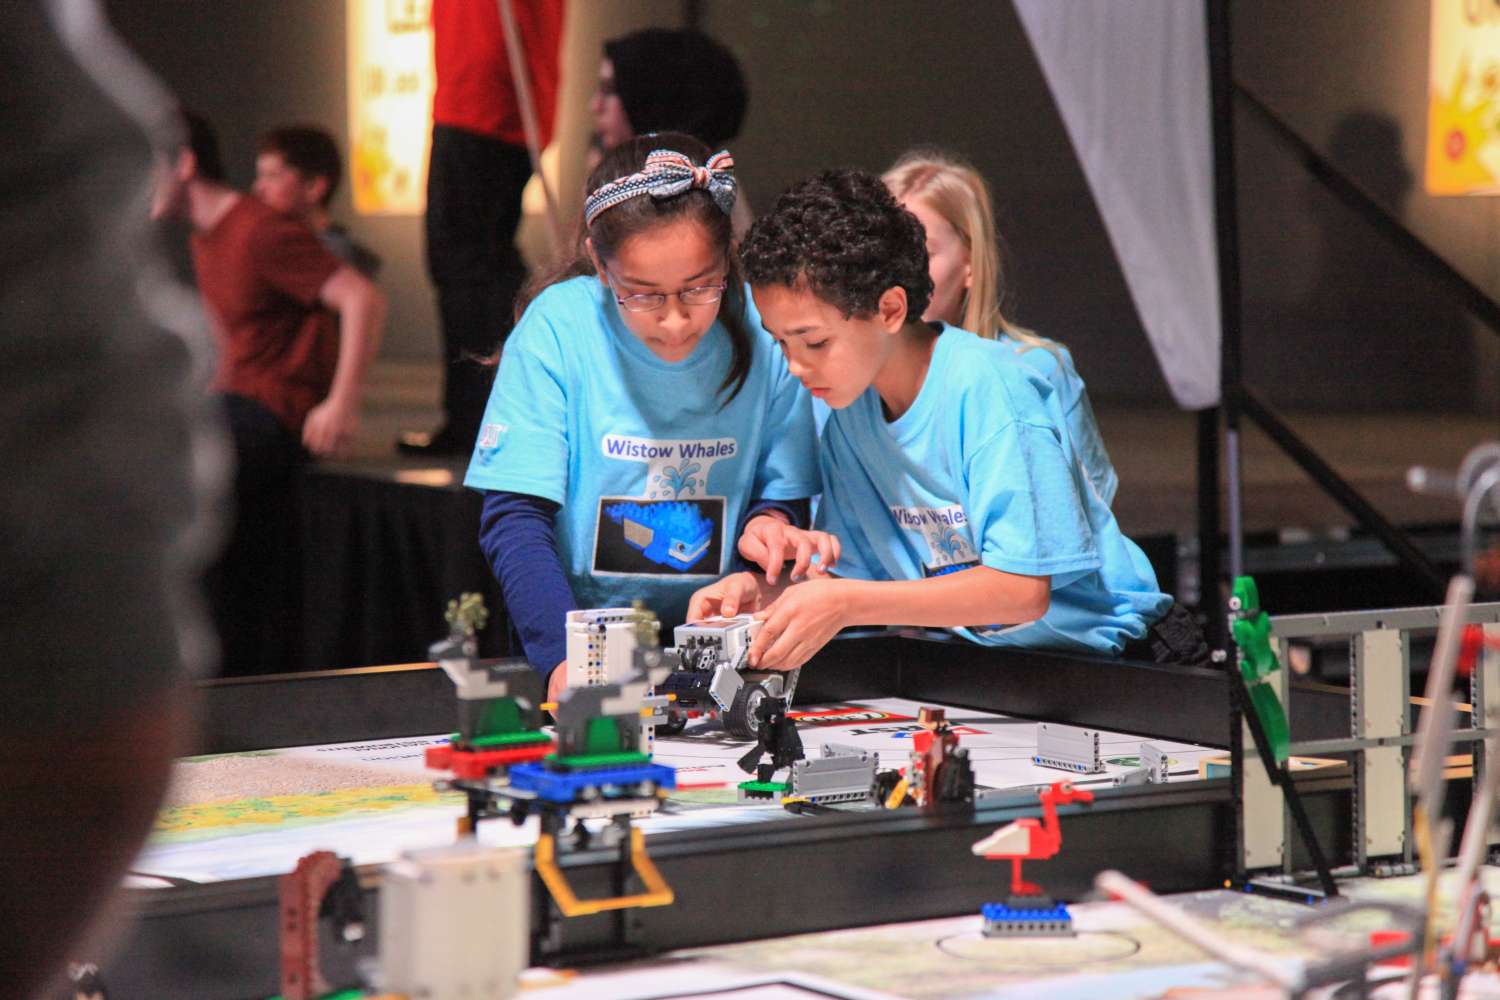 The finals of the FIRST Lego League Challenge: Animal Allies were held at Bristol University